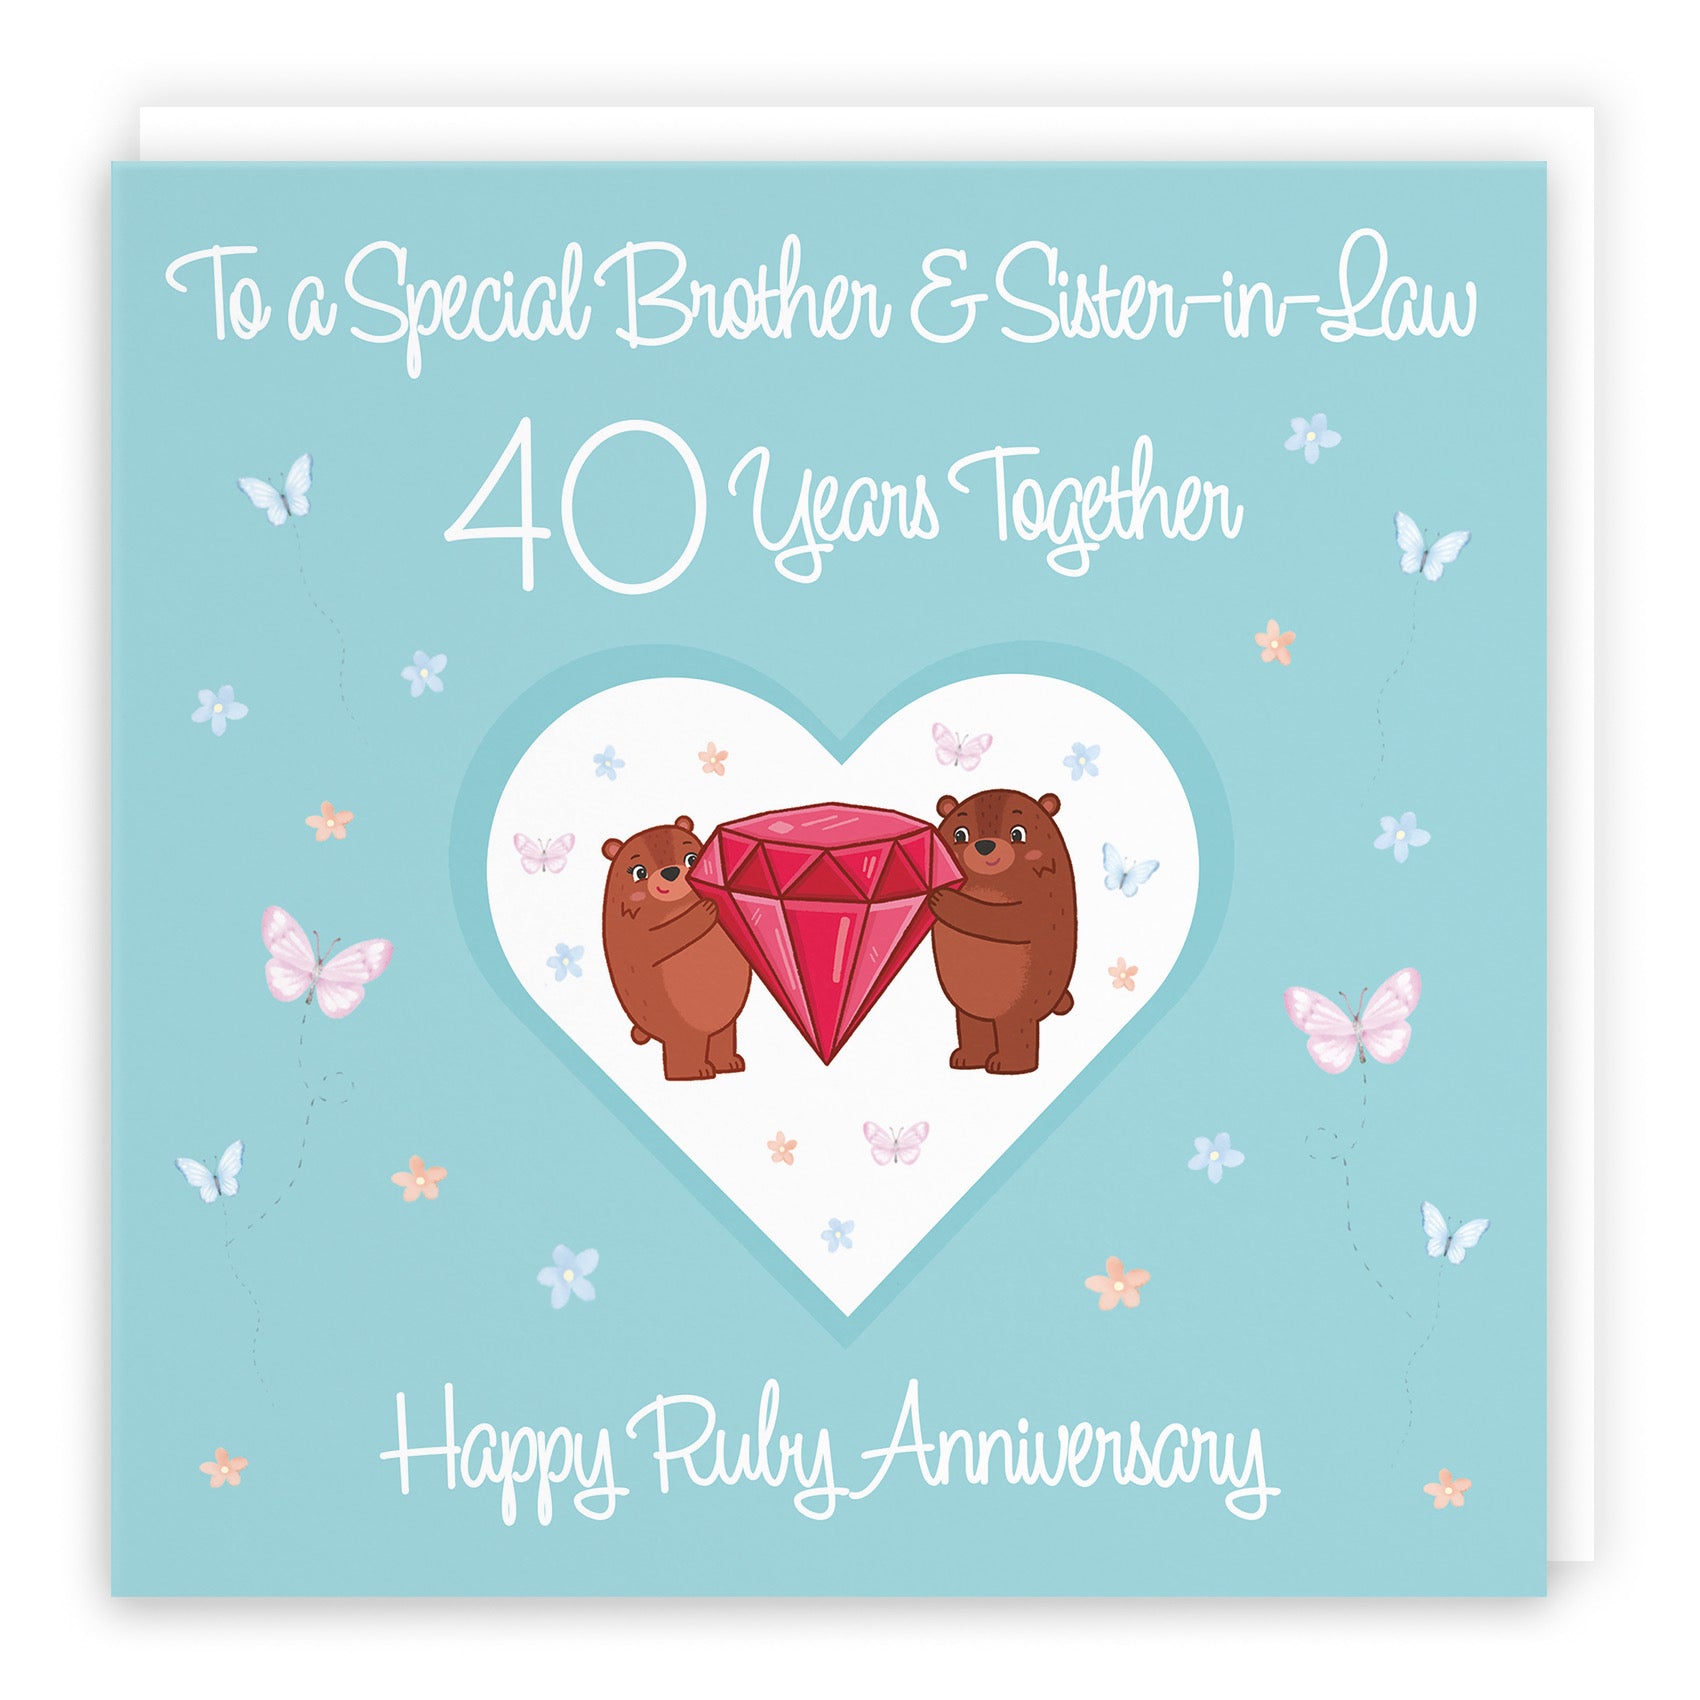 Large Brother & Sister-in-Law 40th Anniversary Card Romantic Meadows - Default Title (B0CXY1WVZ3)